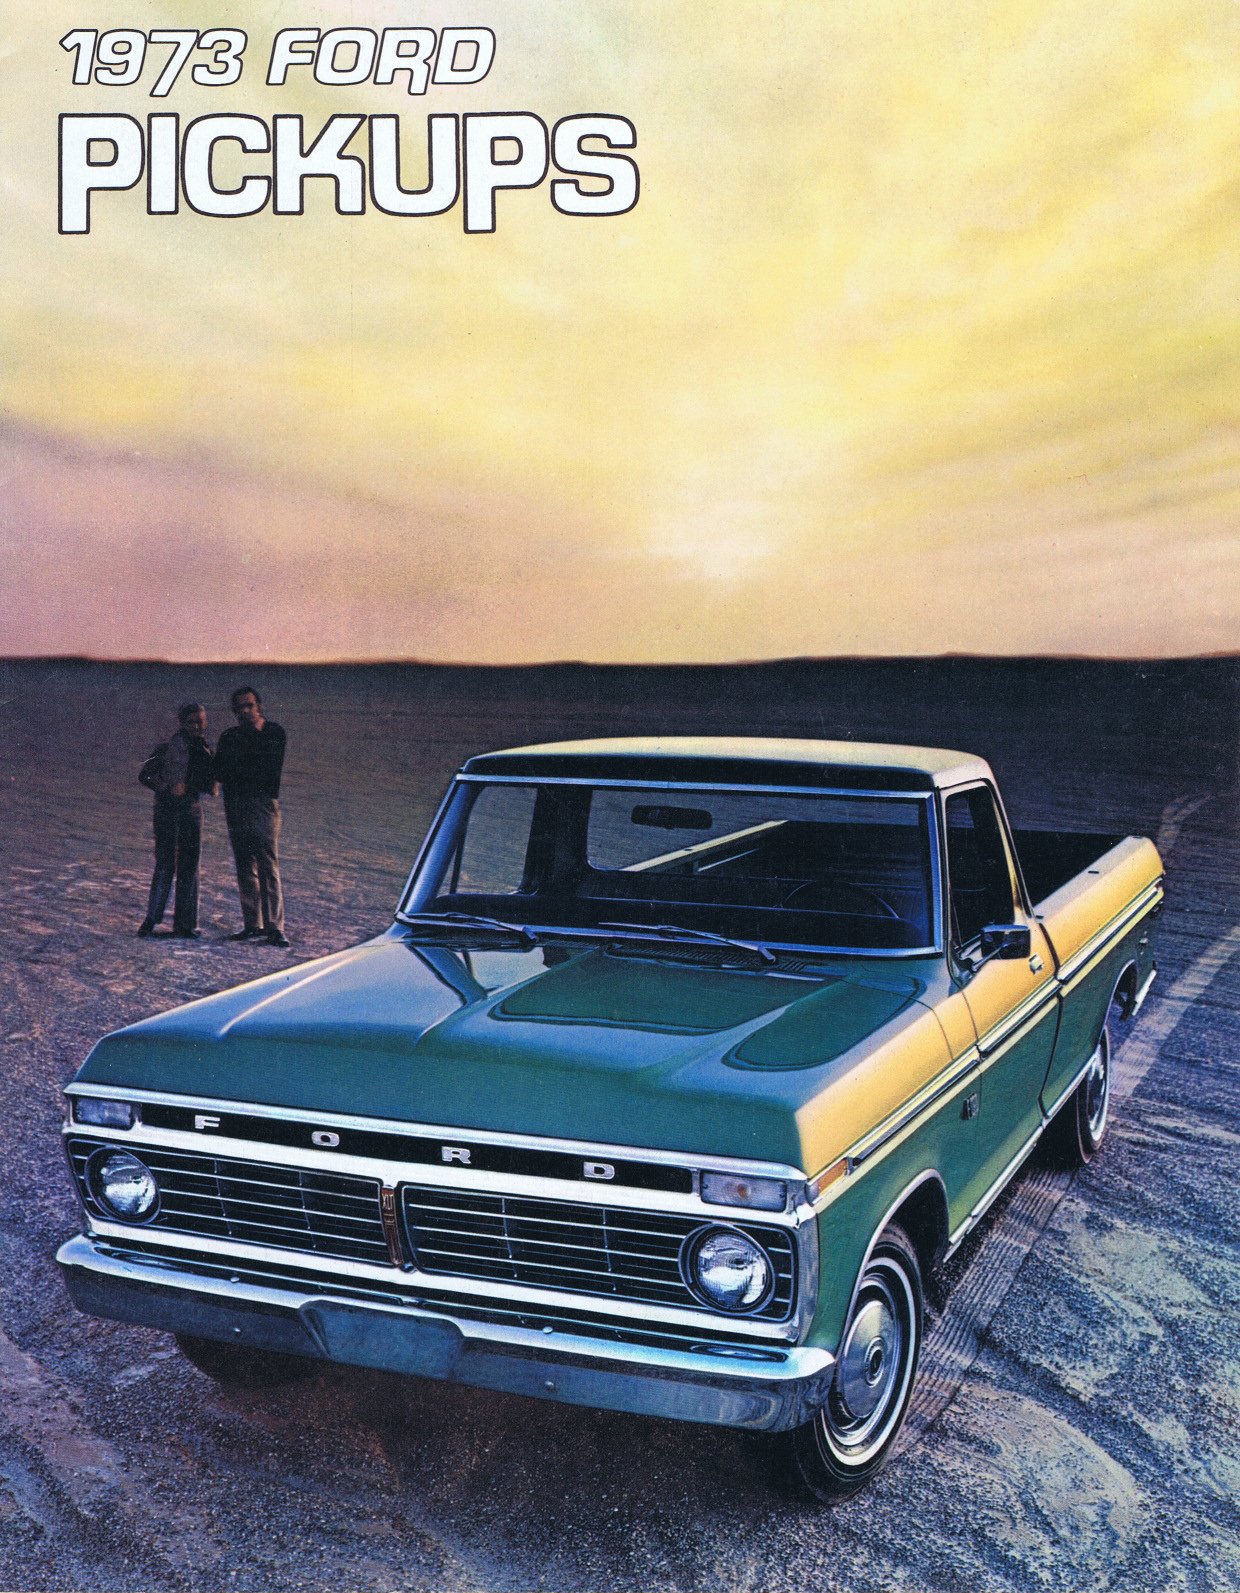 1973_Ford_Pickups-01